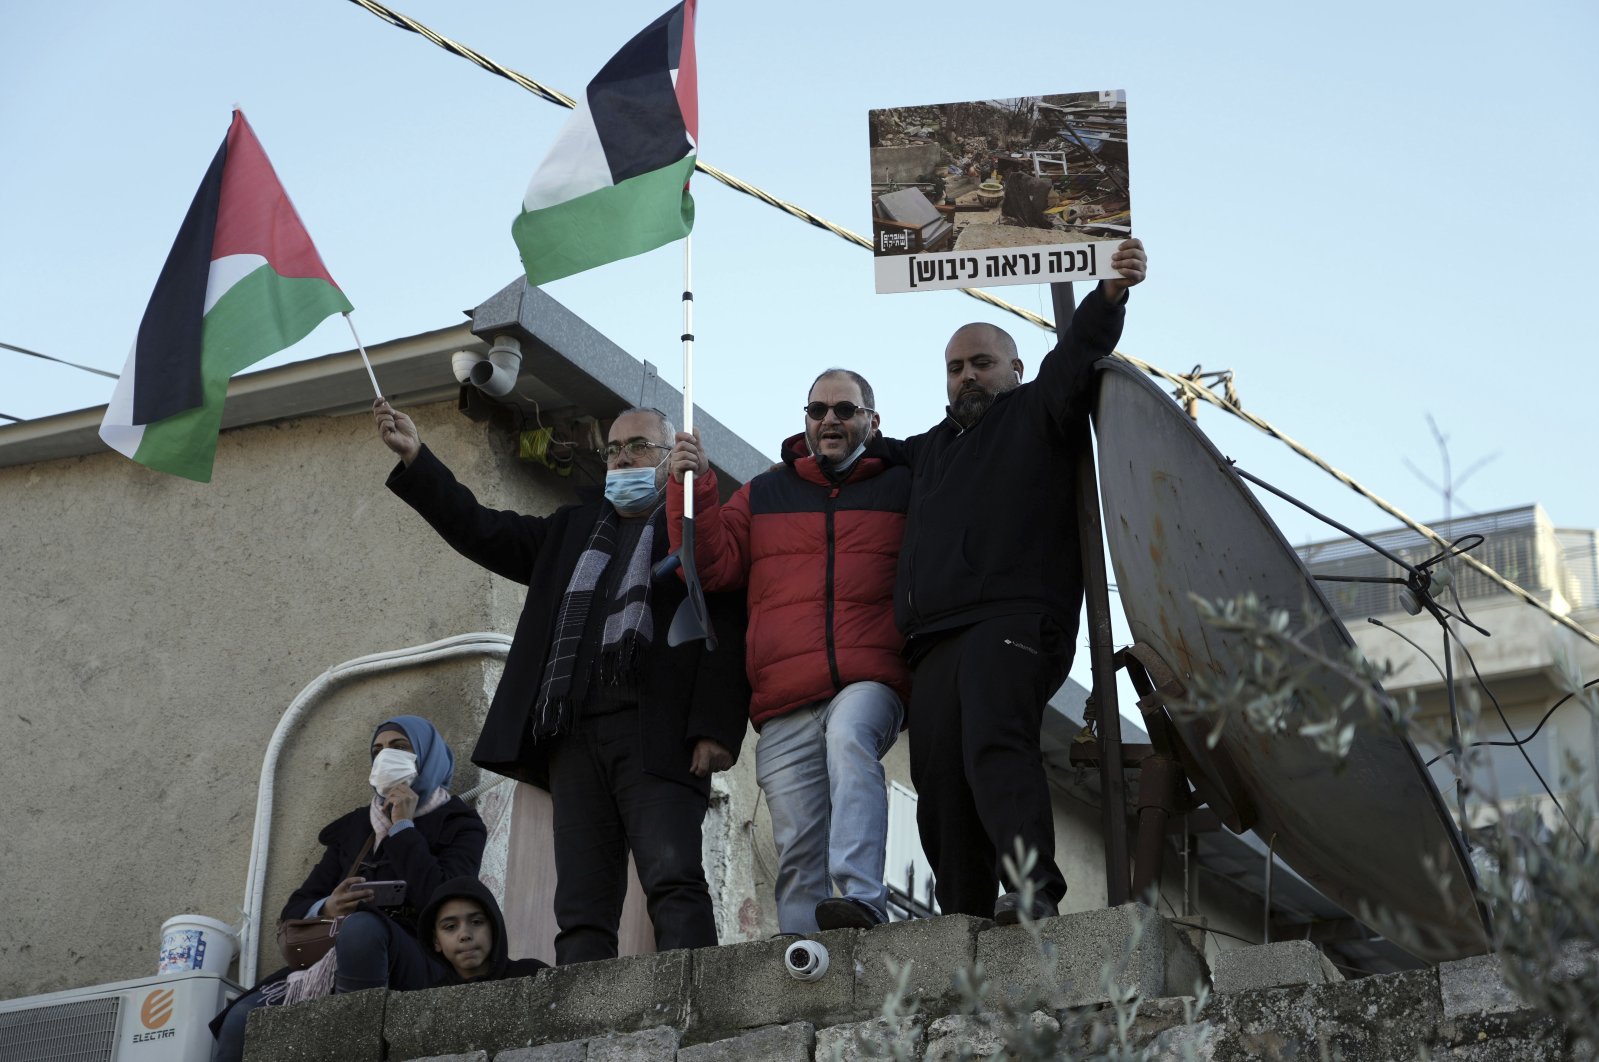 Israeli parliament member Ofer Cassif, center, waves a Palestinian flag at a protest in solidarity with Palestinian residents of the embattled Sheikh Jarrah neighborhood of east Jerusalem, occupied Palestine, Jan. 21, 2022. (AP Photo)